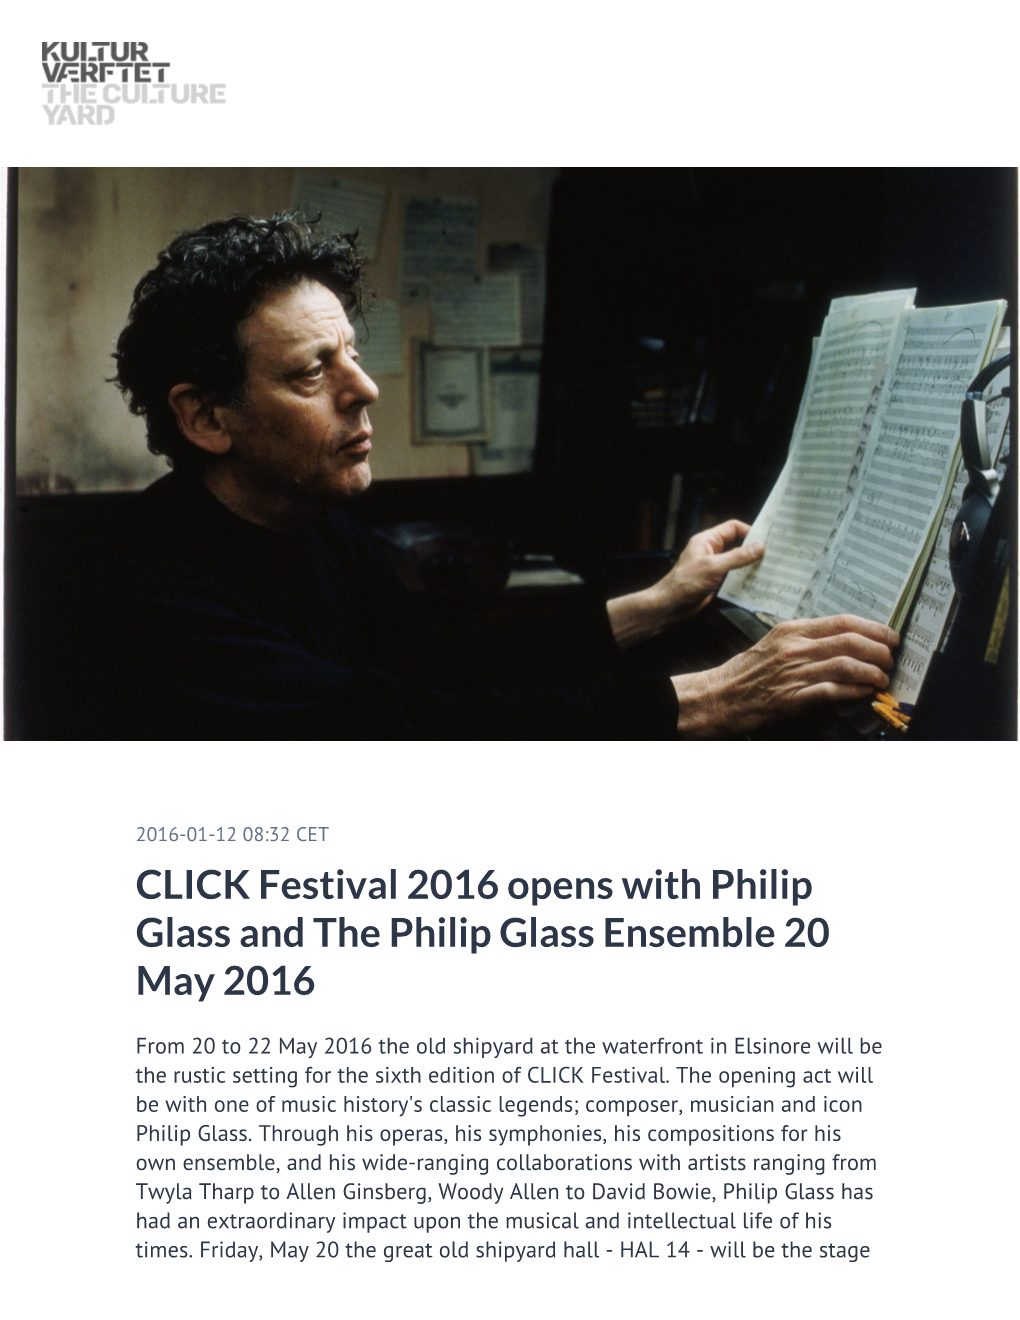 CLICK Festival 2016 Opens with Philip Glass and the Philip Glass Ensemble 20 May 2016